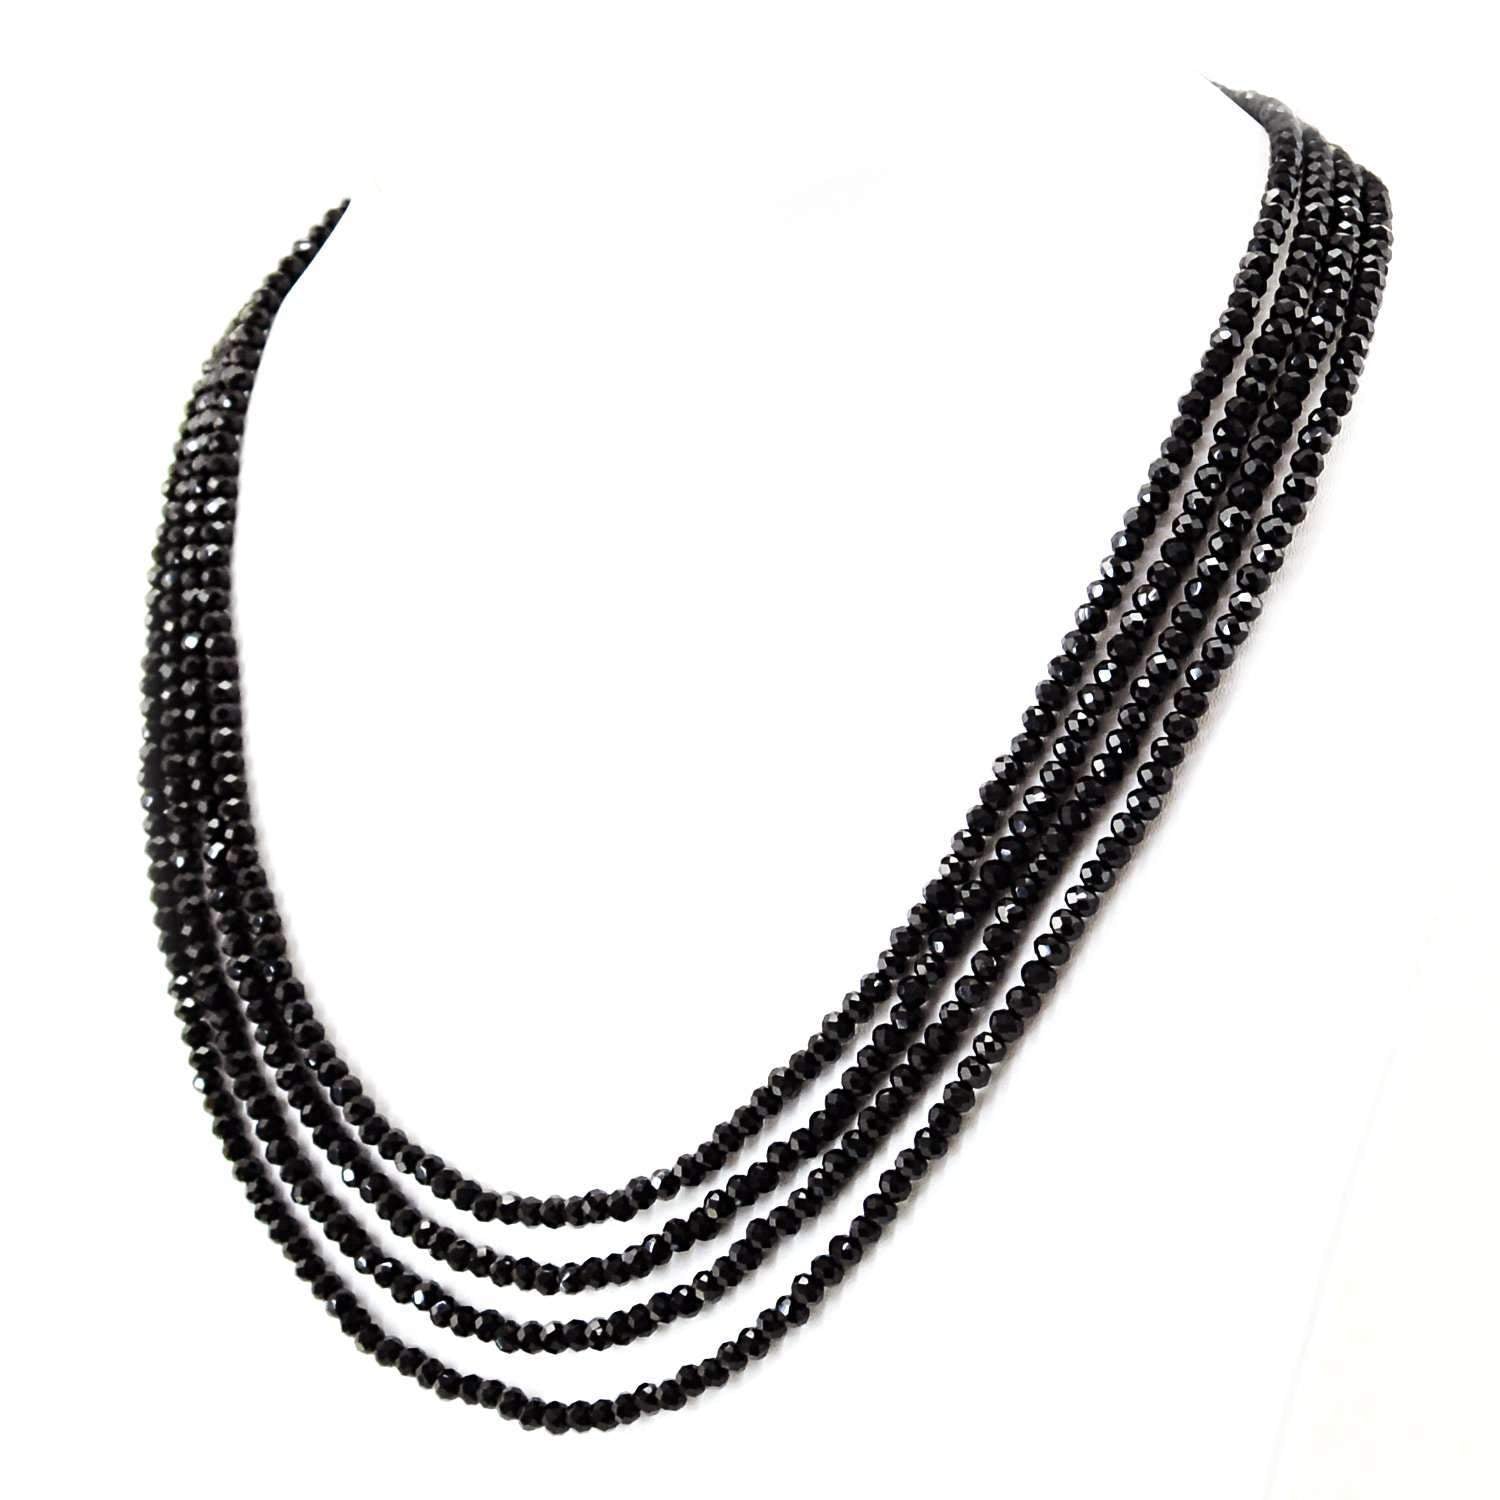 gemsmore:Untreated Black Spinel Necklace Natural 4 Line Round Cut Beads